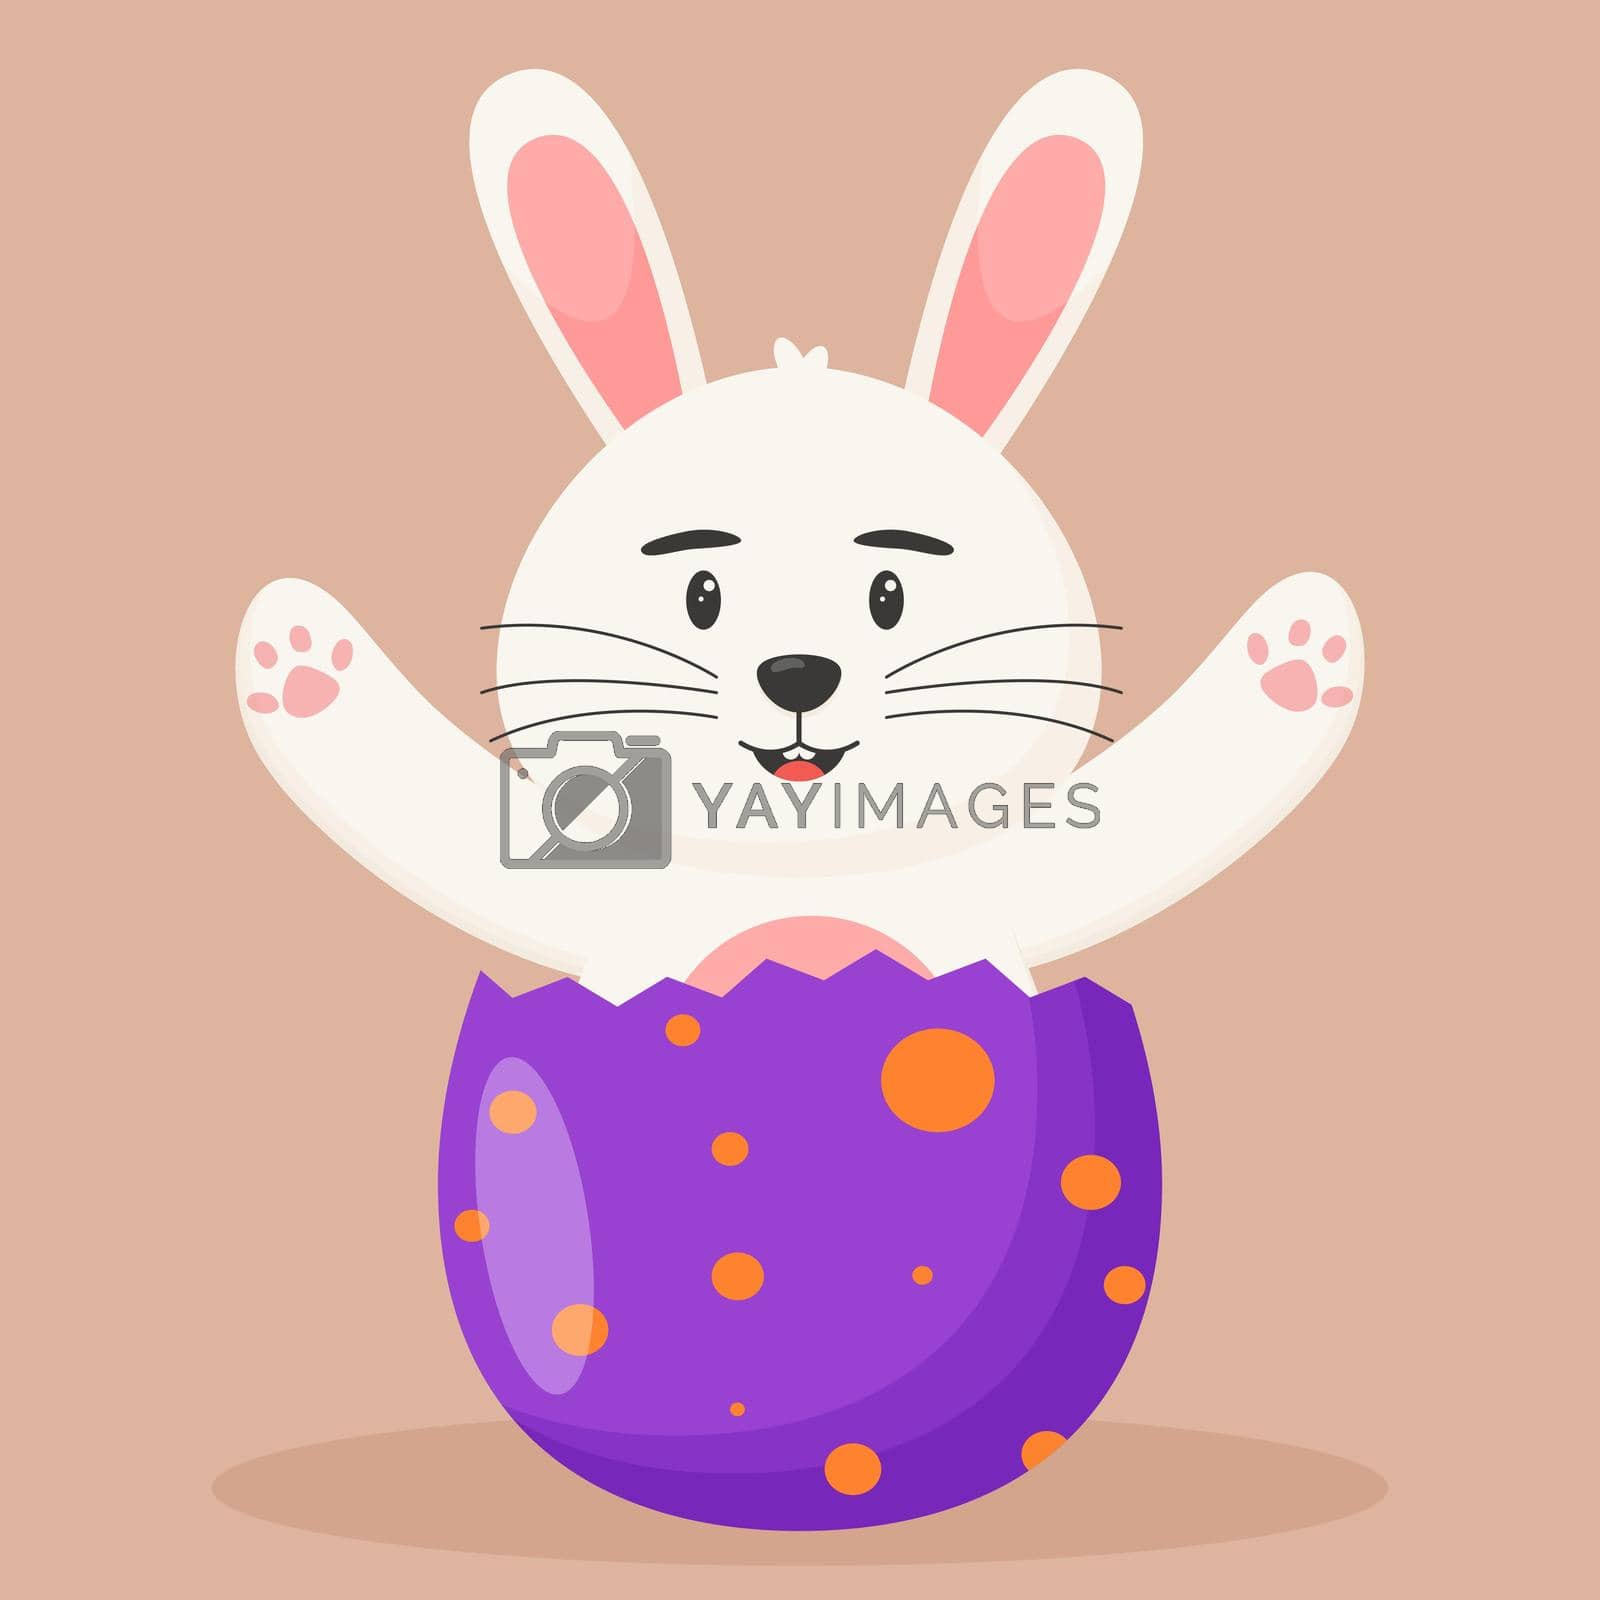 Royalty free image of Cute Easter bunny is sitting in an Easter egg. Easter concept by anna_orlova